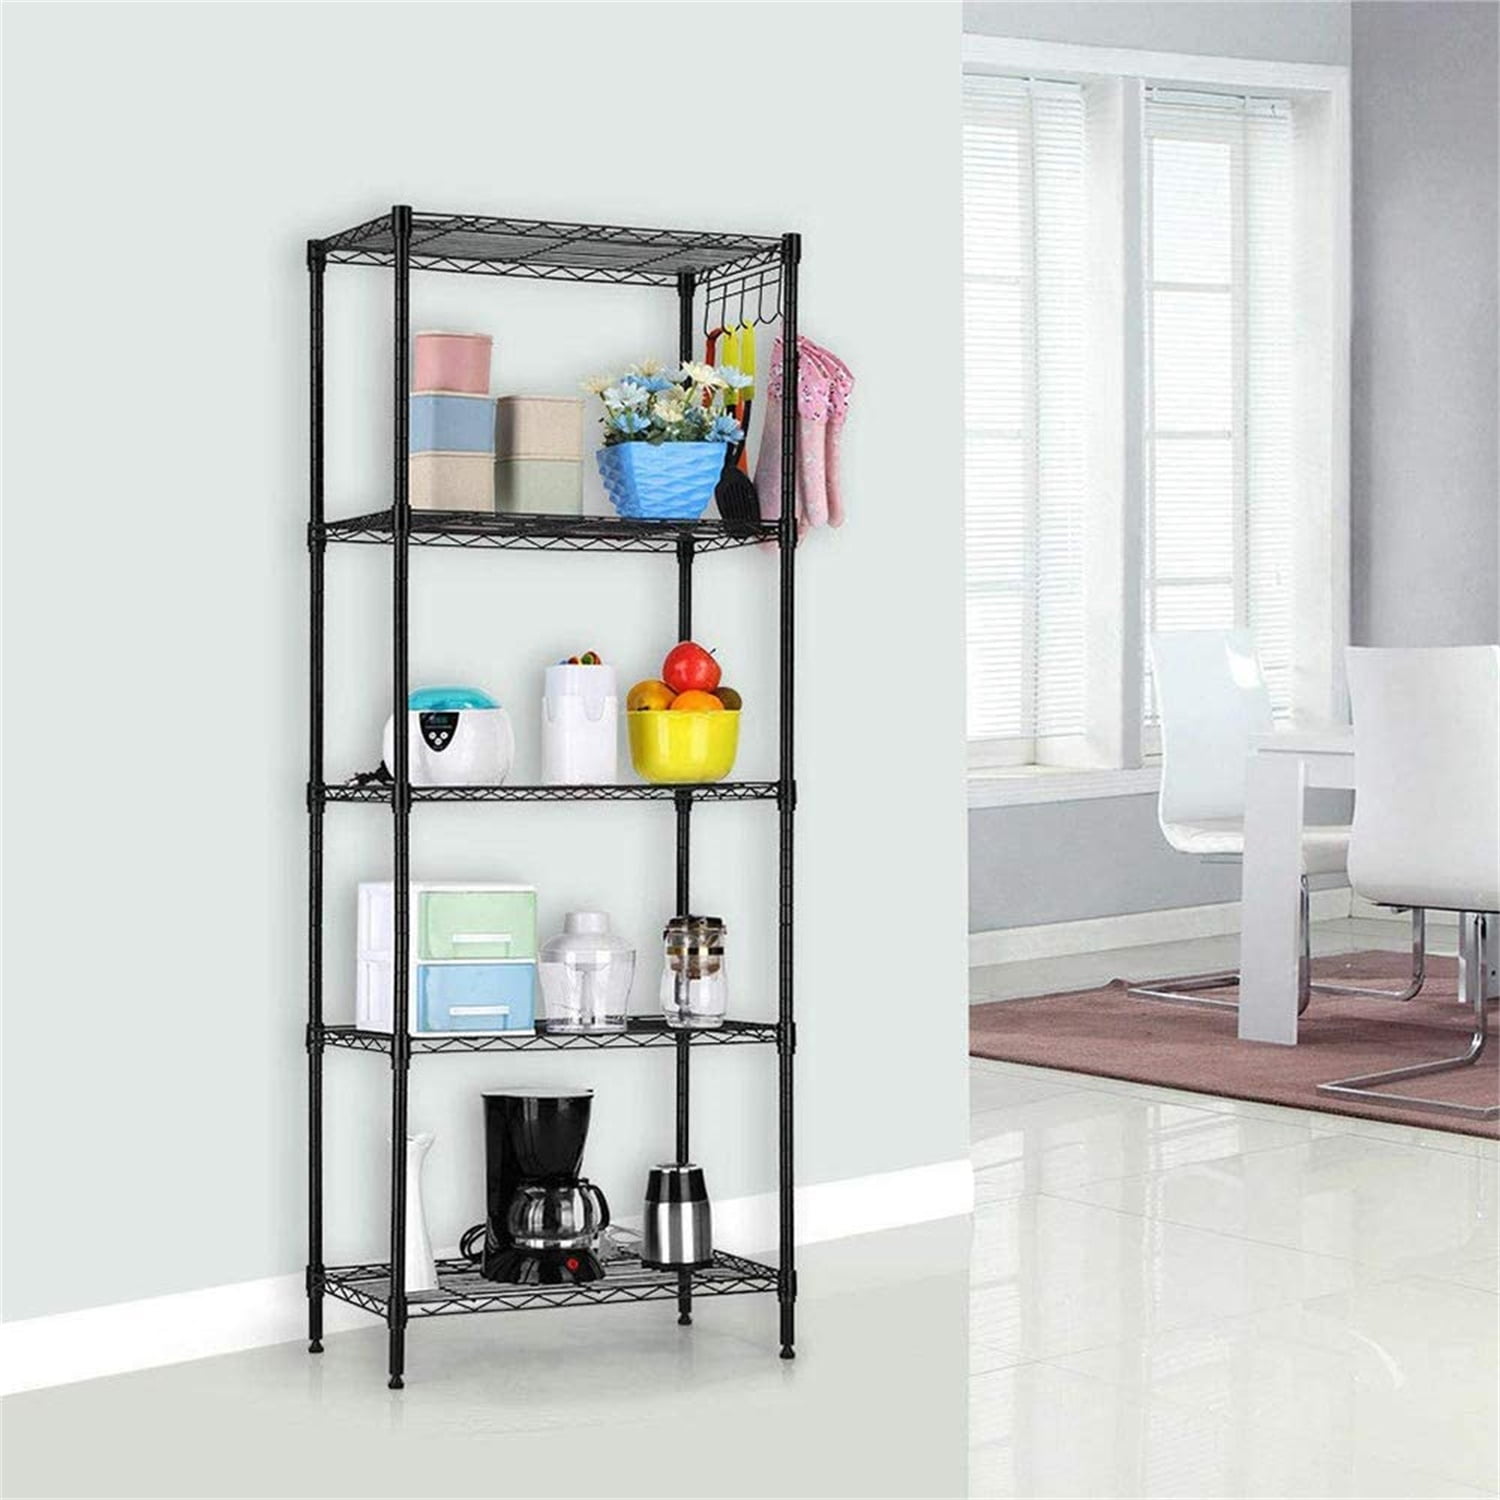 RACK5S - Stainless Steel Storage Rack with 5 Shelves and Adjustable Feet -  Parry